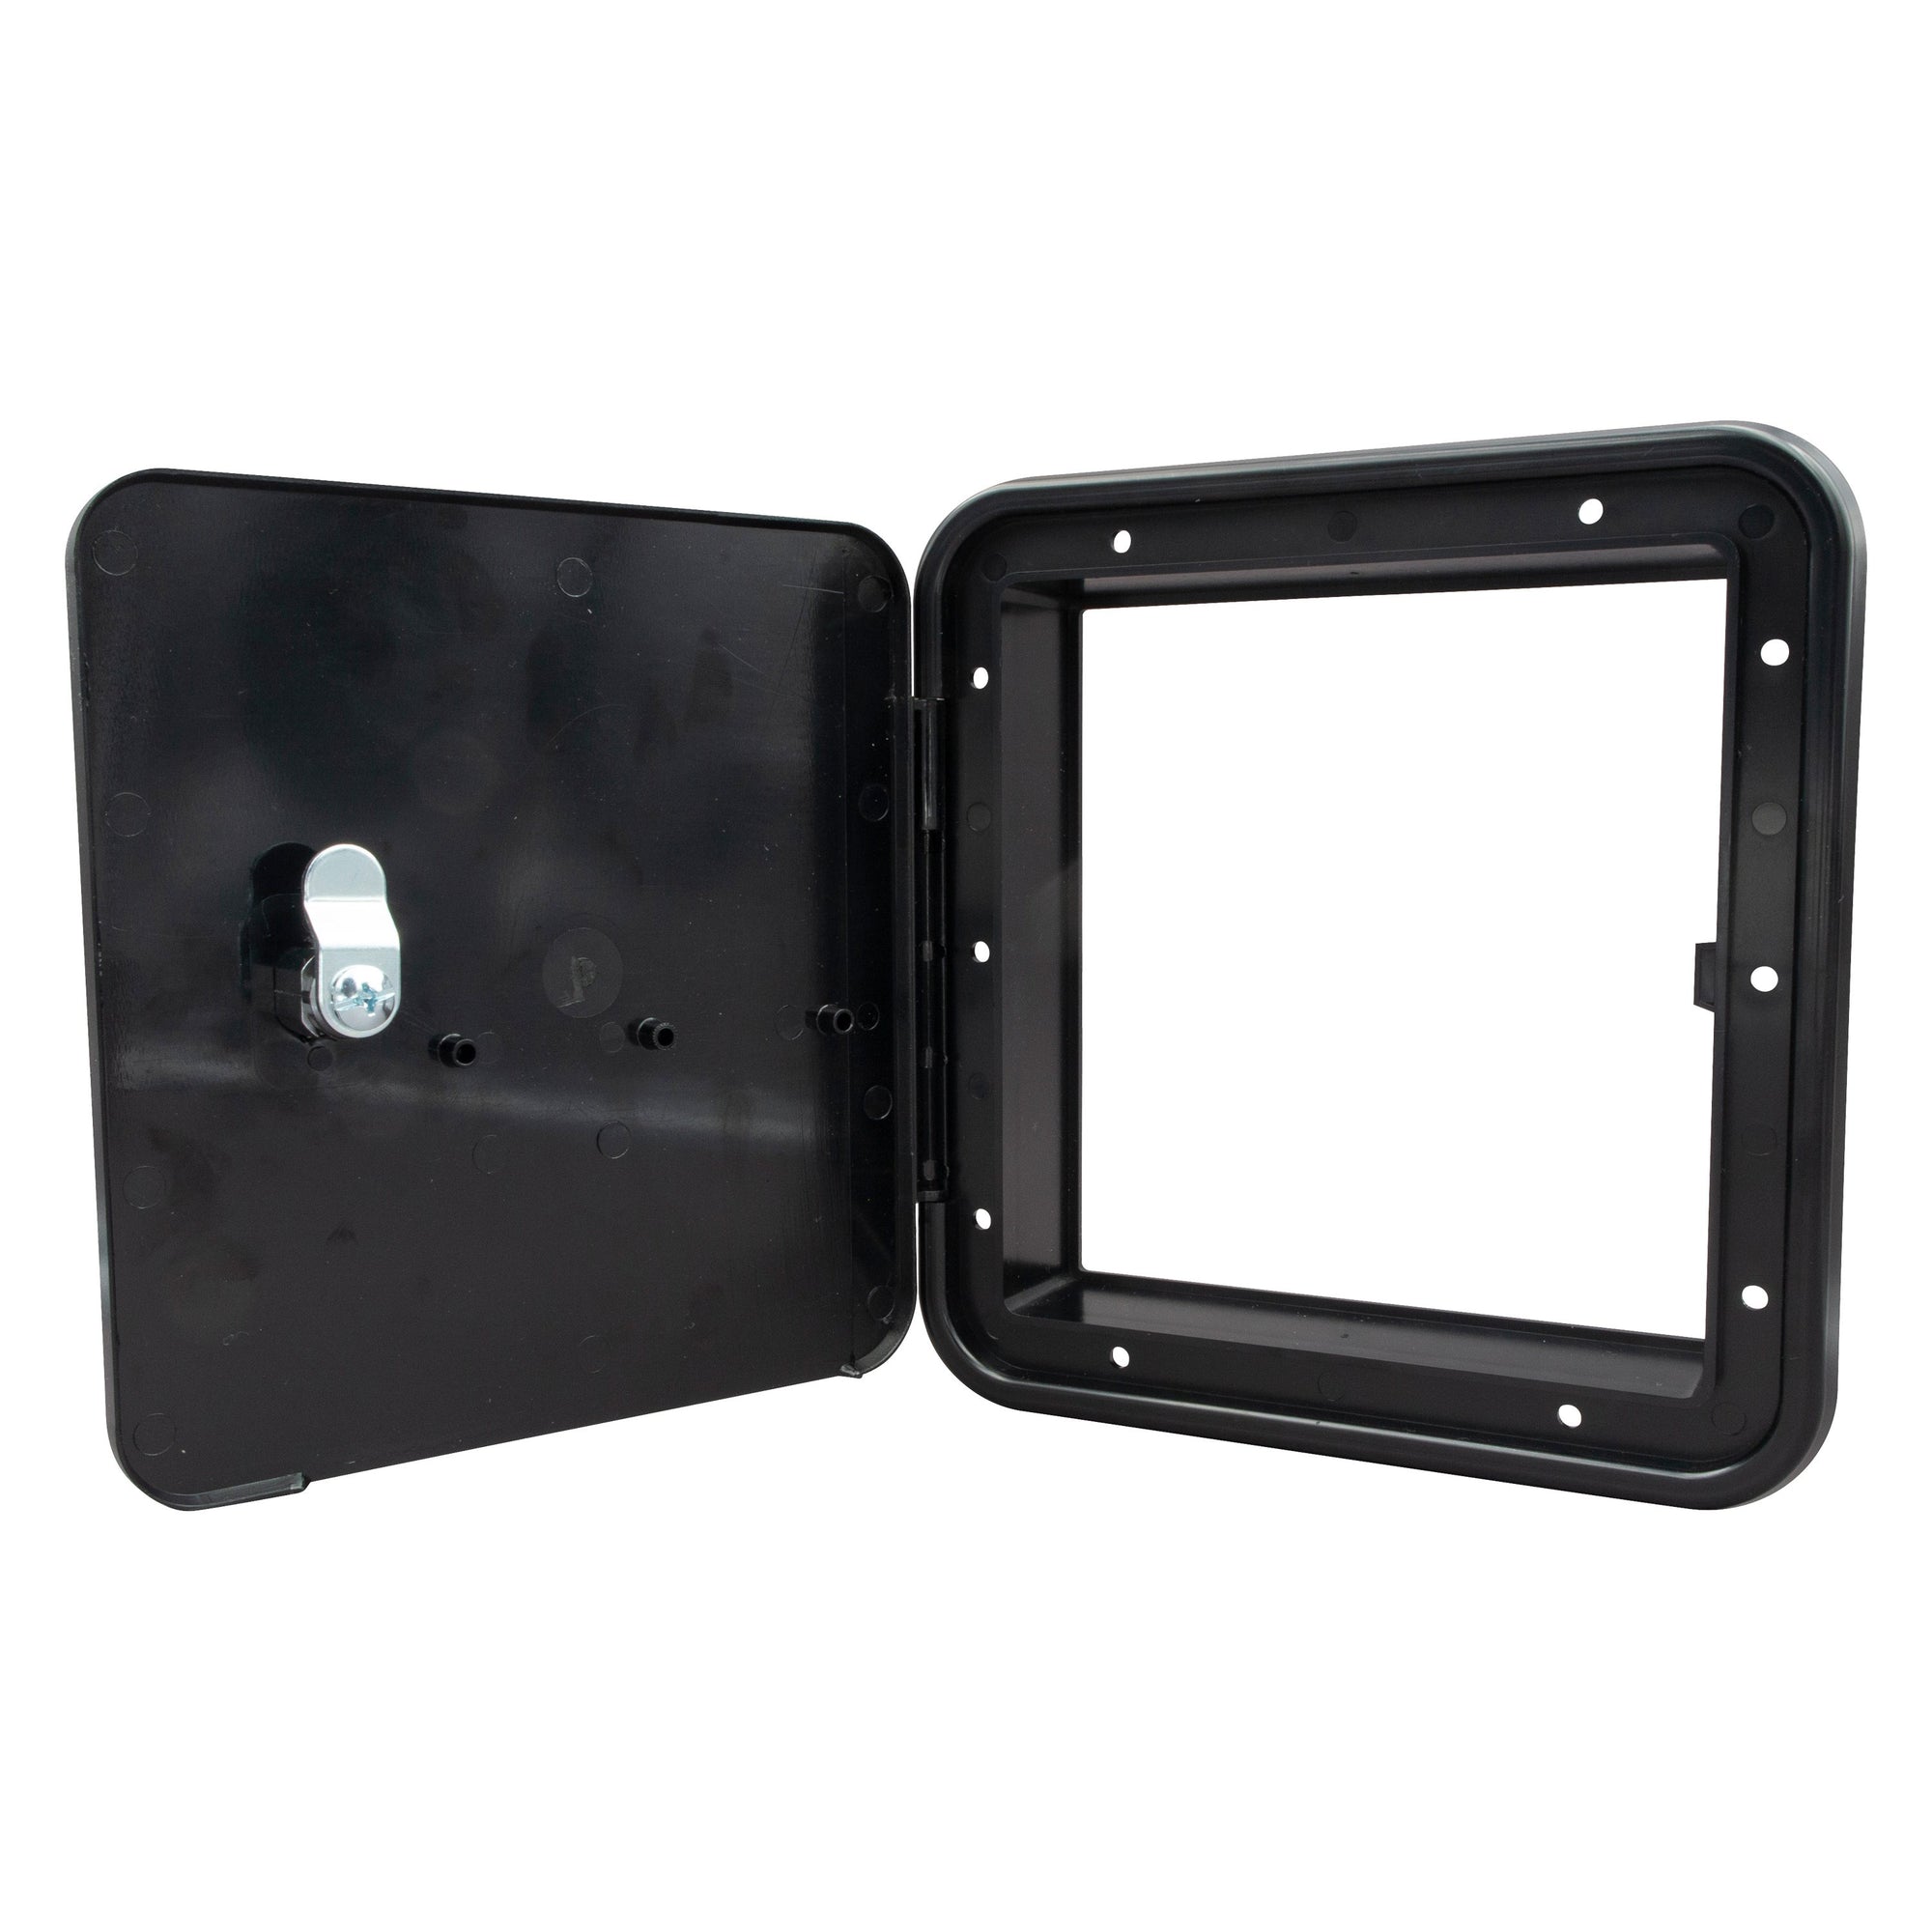 Thetford 94308 Multi-Purpose/Fuel Hatch without Back - Keyed Entry, Black